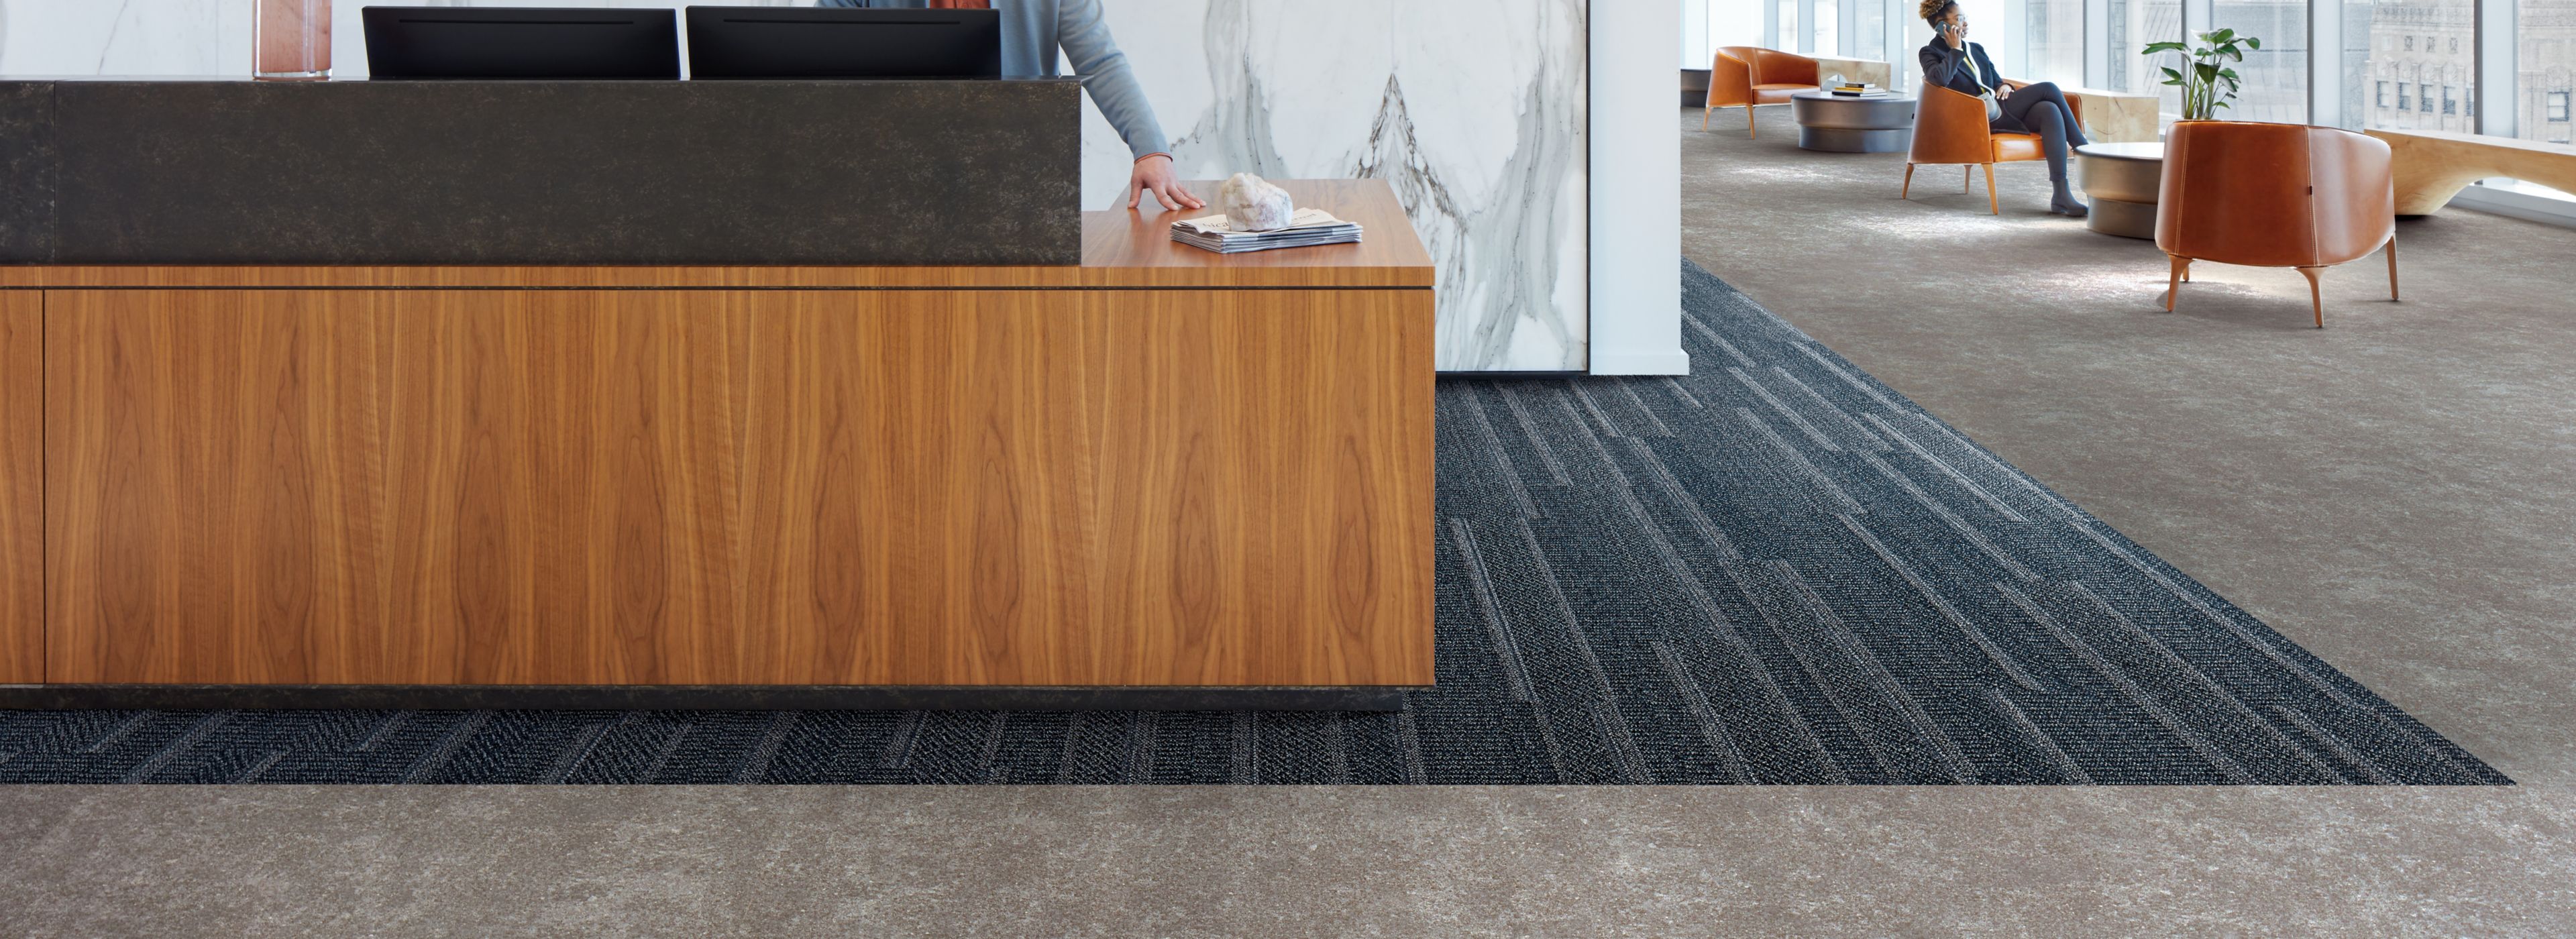 Interface Simple Sash plank carpet tile and Walk of Life LVT in a corporate lobby area with front desk  afbeeldingnummer 1